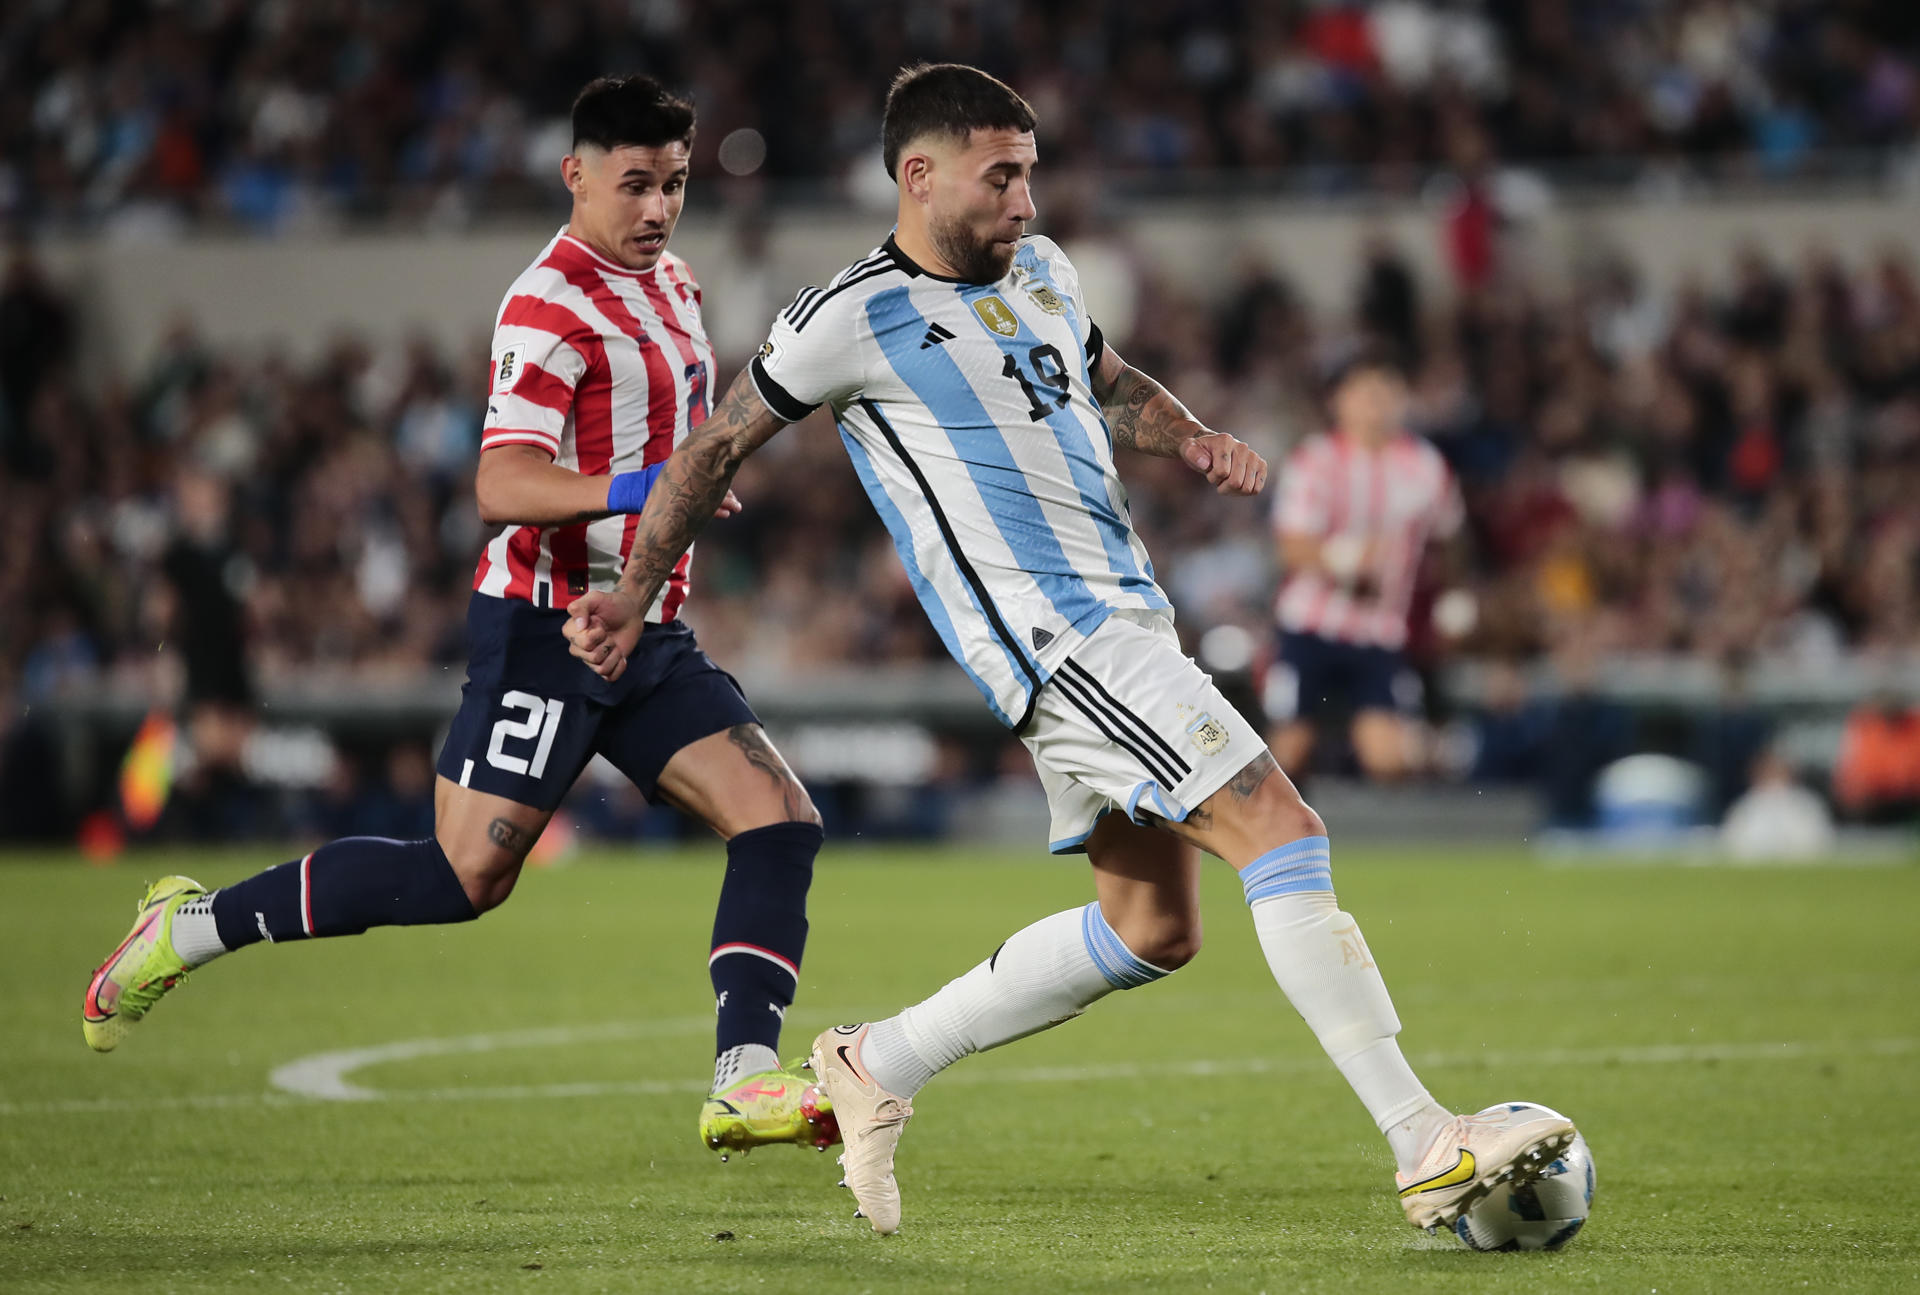 Nicolas Otamendi (r) from Argentina disputes the ball with Adam Bareiro (L) from Paraguay, in a match of the South American Qualifiers for the 2026 Soccer World Cup between Argentina and Paraguay at the Mas Monumental stadium in Buenos Aires, Argentina 12 October 2023. EFE-EPA/Luciano Gonzalez